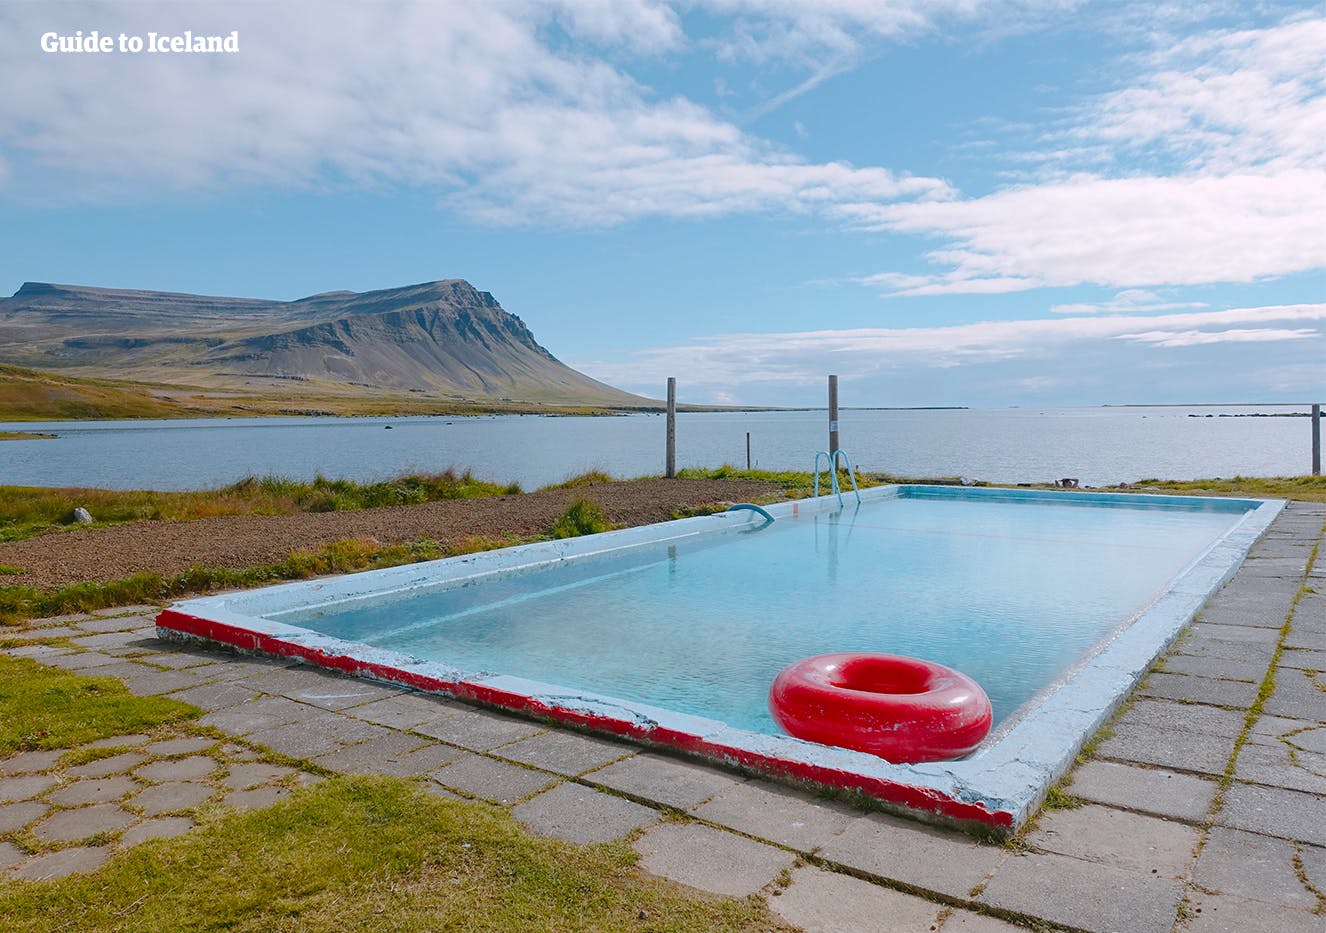 Very few visitors head to the remote Westfjords, even in summer.